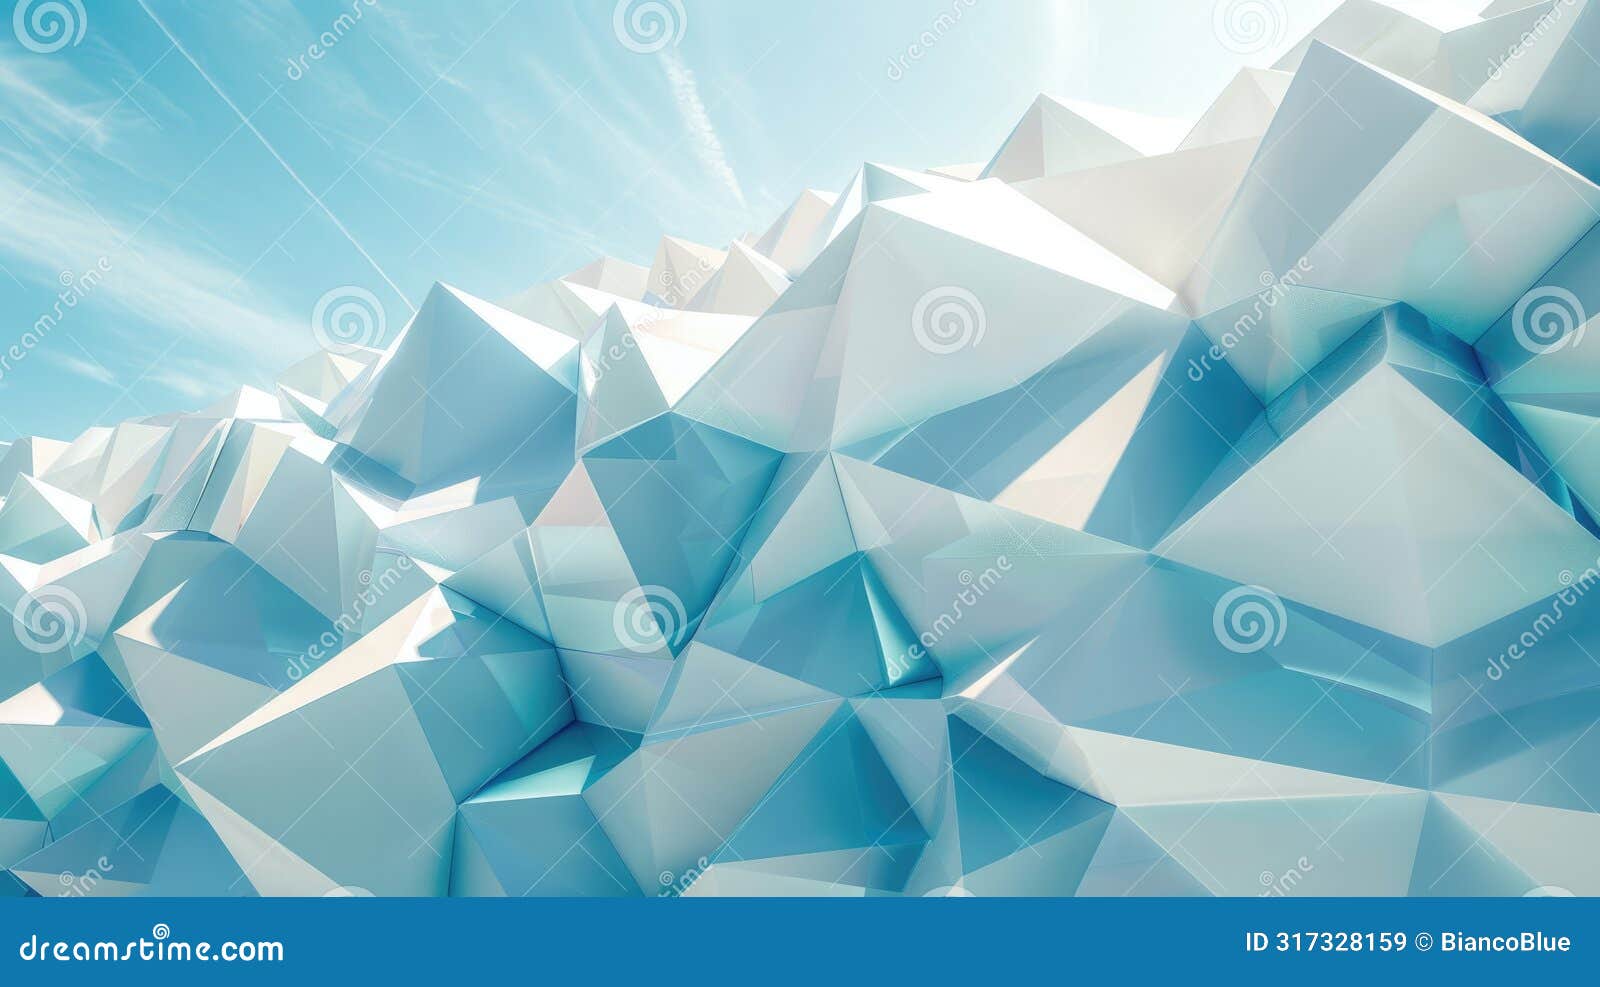 3d render of a blue and white geometric surface with a slight gradient from light to dark blue aig51a